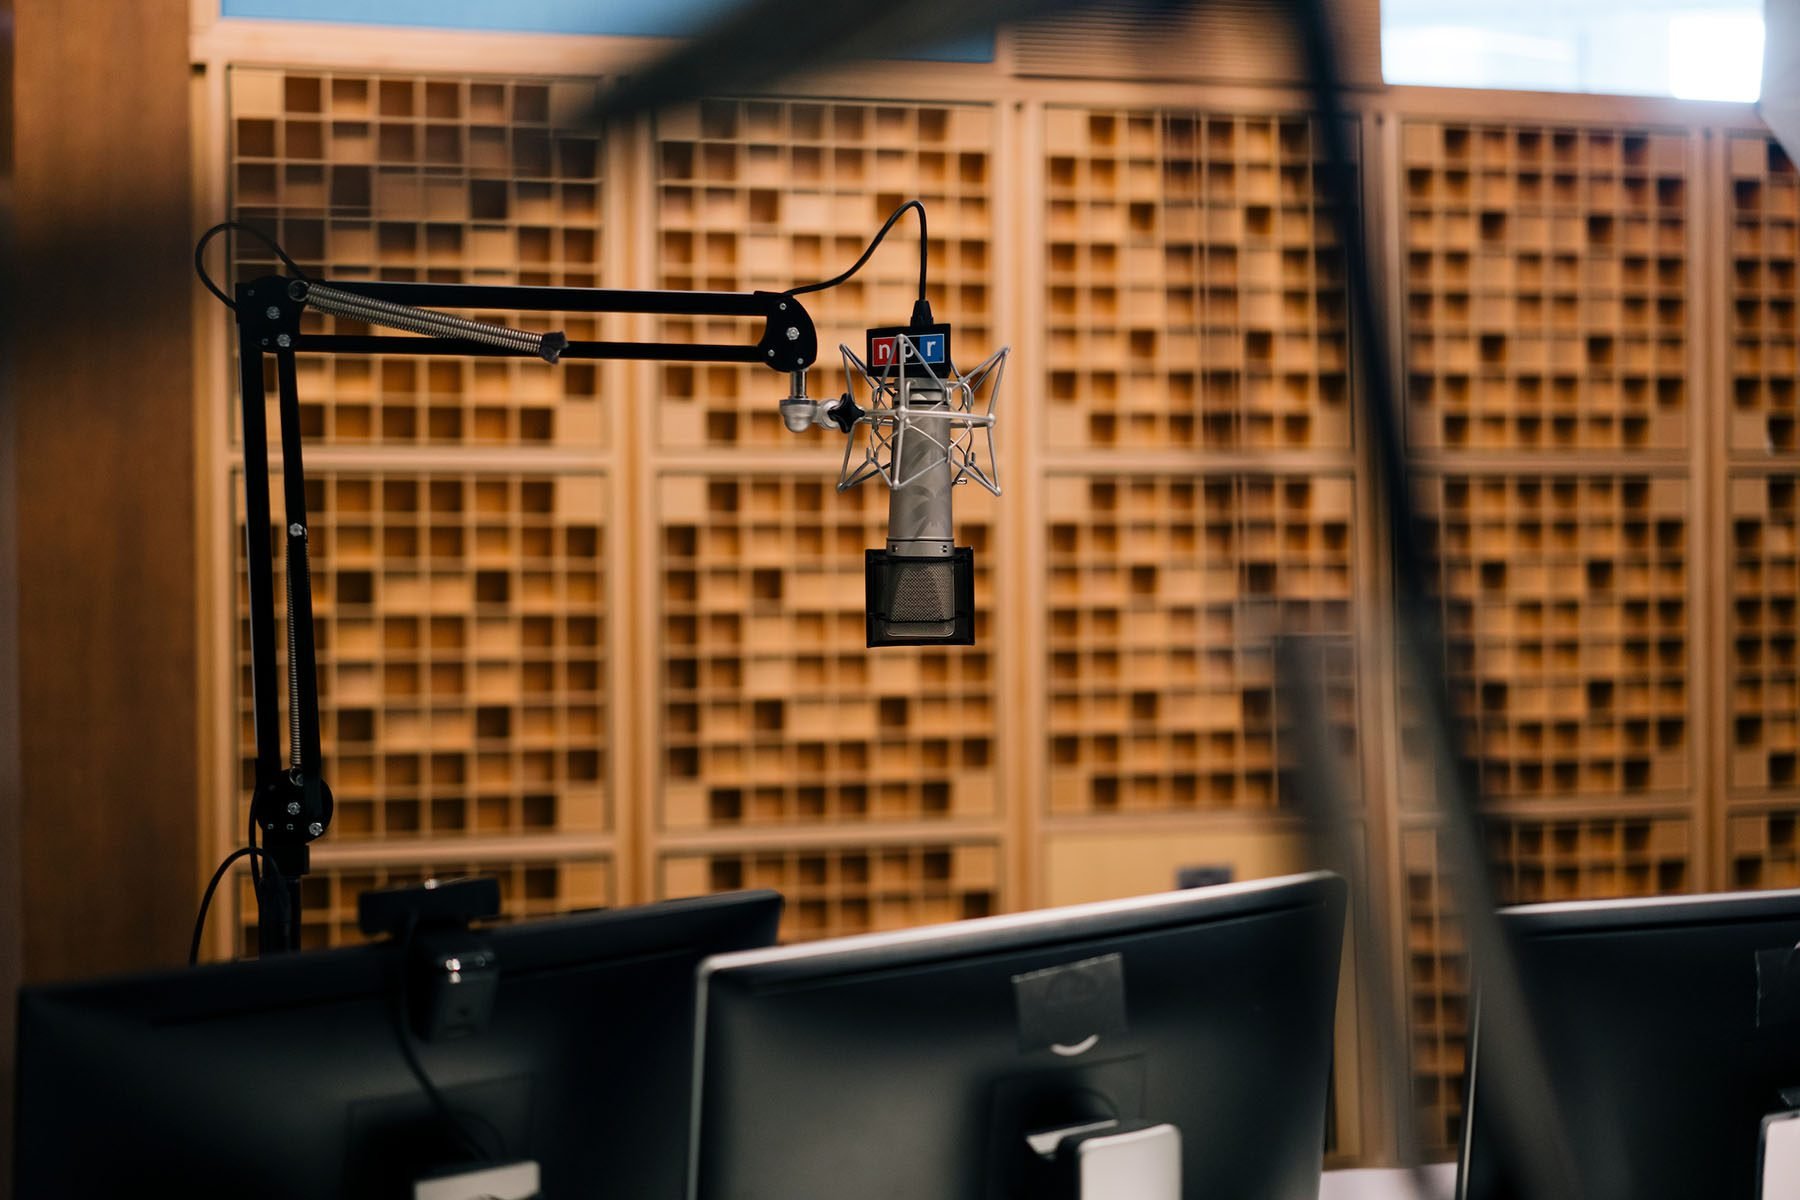 Microphones are seen in a studio at the NPR headquarters.